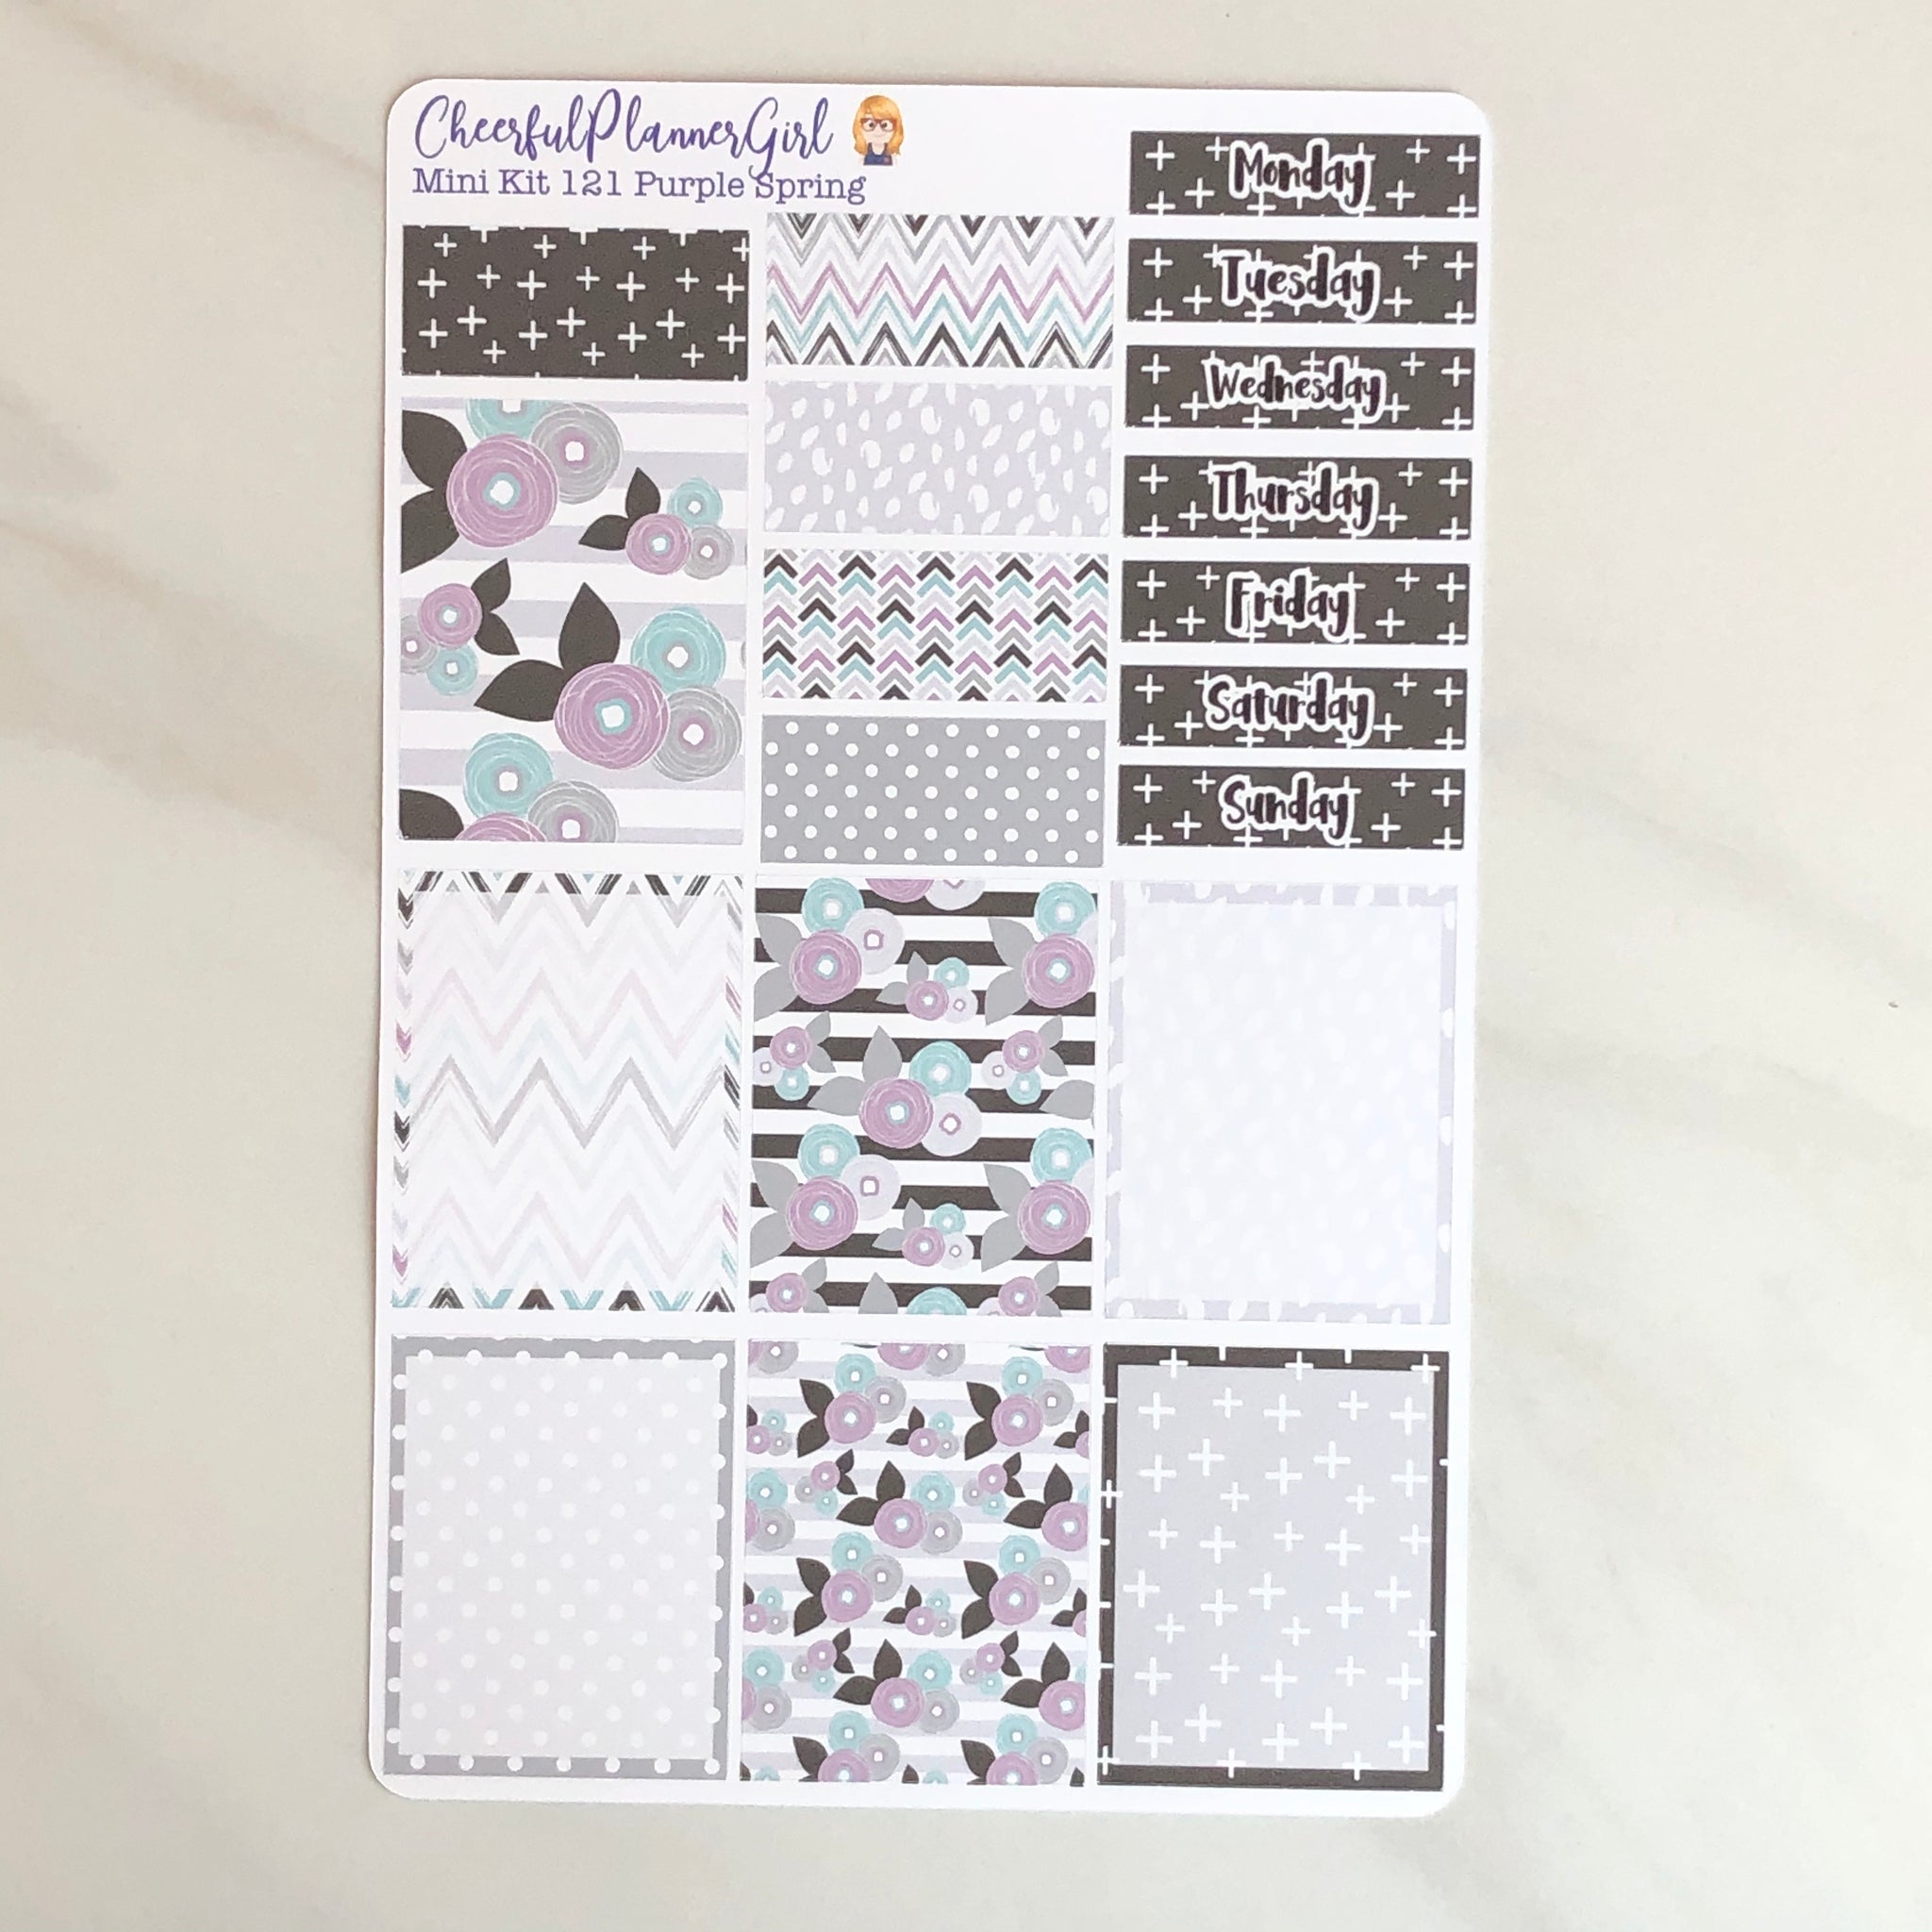 Purple Spring Mini Kit Weekly Layout Planner Stickers